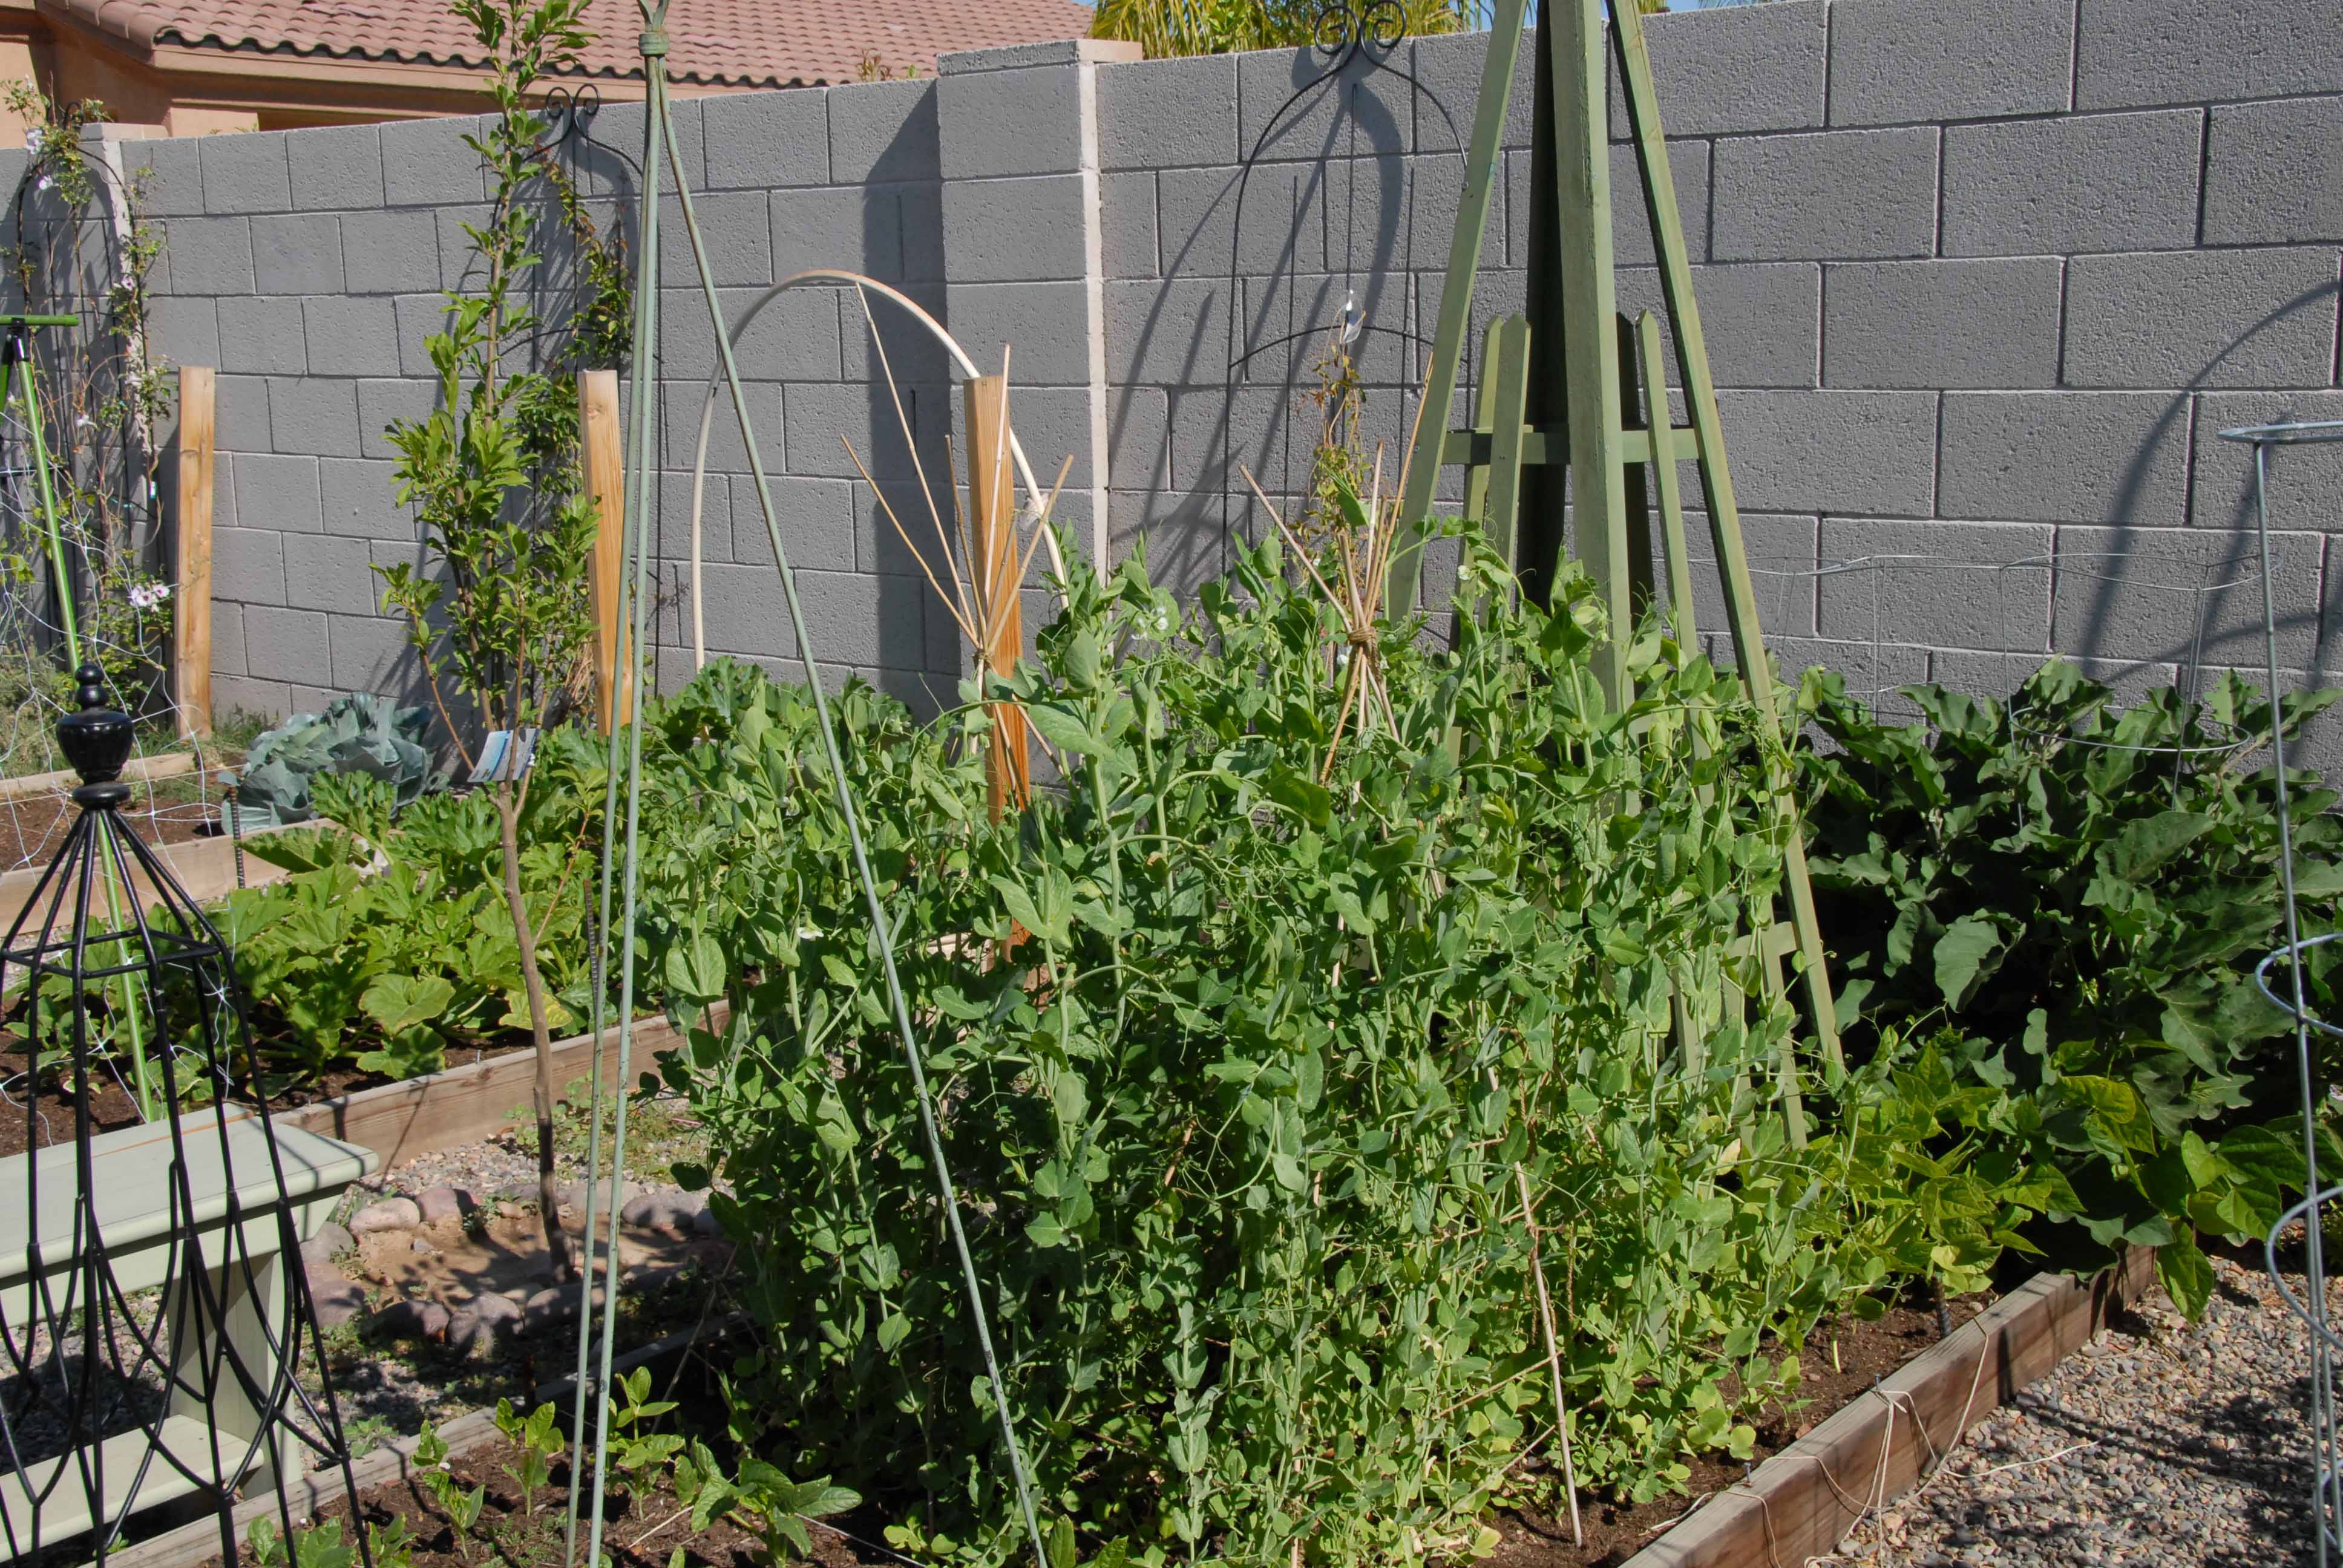 The peas are growing like crazy!